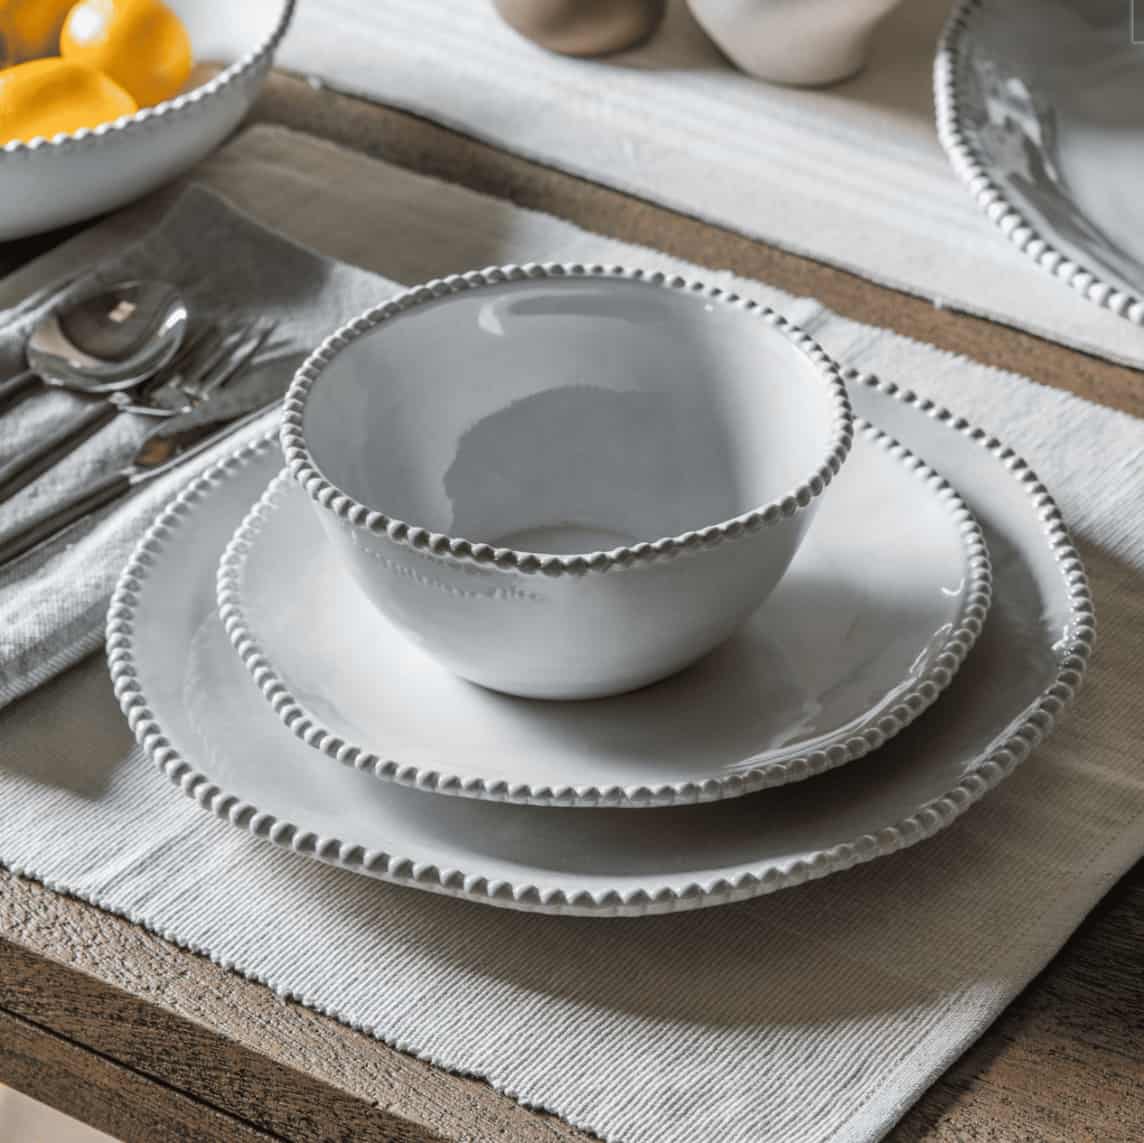 Set of 4 beaded dinner plates by gallery interiors.  With their elegant beaded accents, these side plates effortlessly elevate any meal, whether it’s a casual family gathering or an intimate dinner with friends.